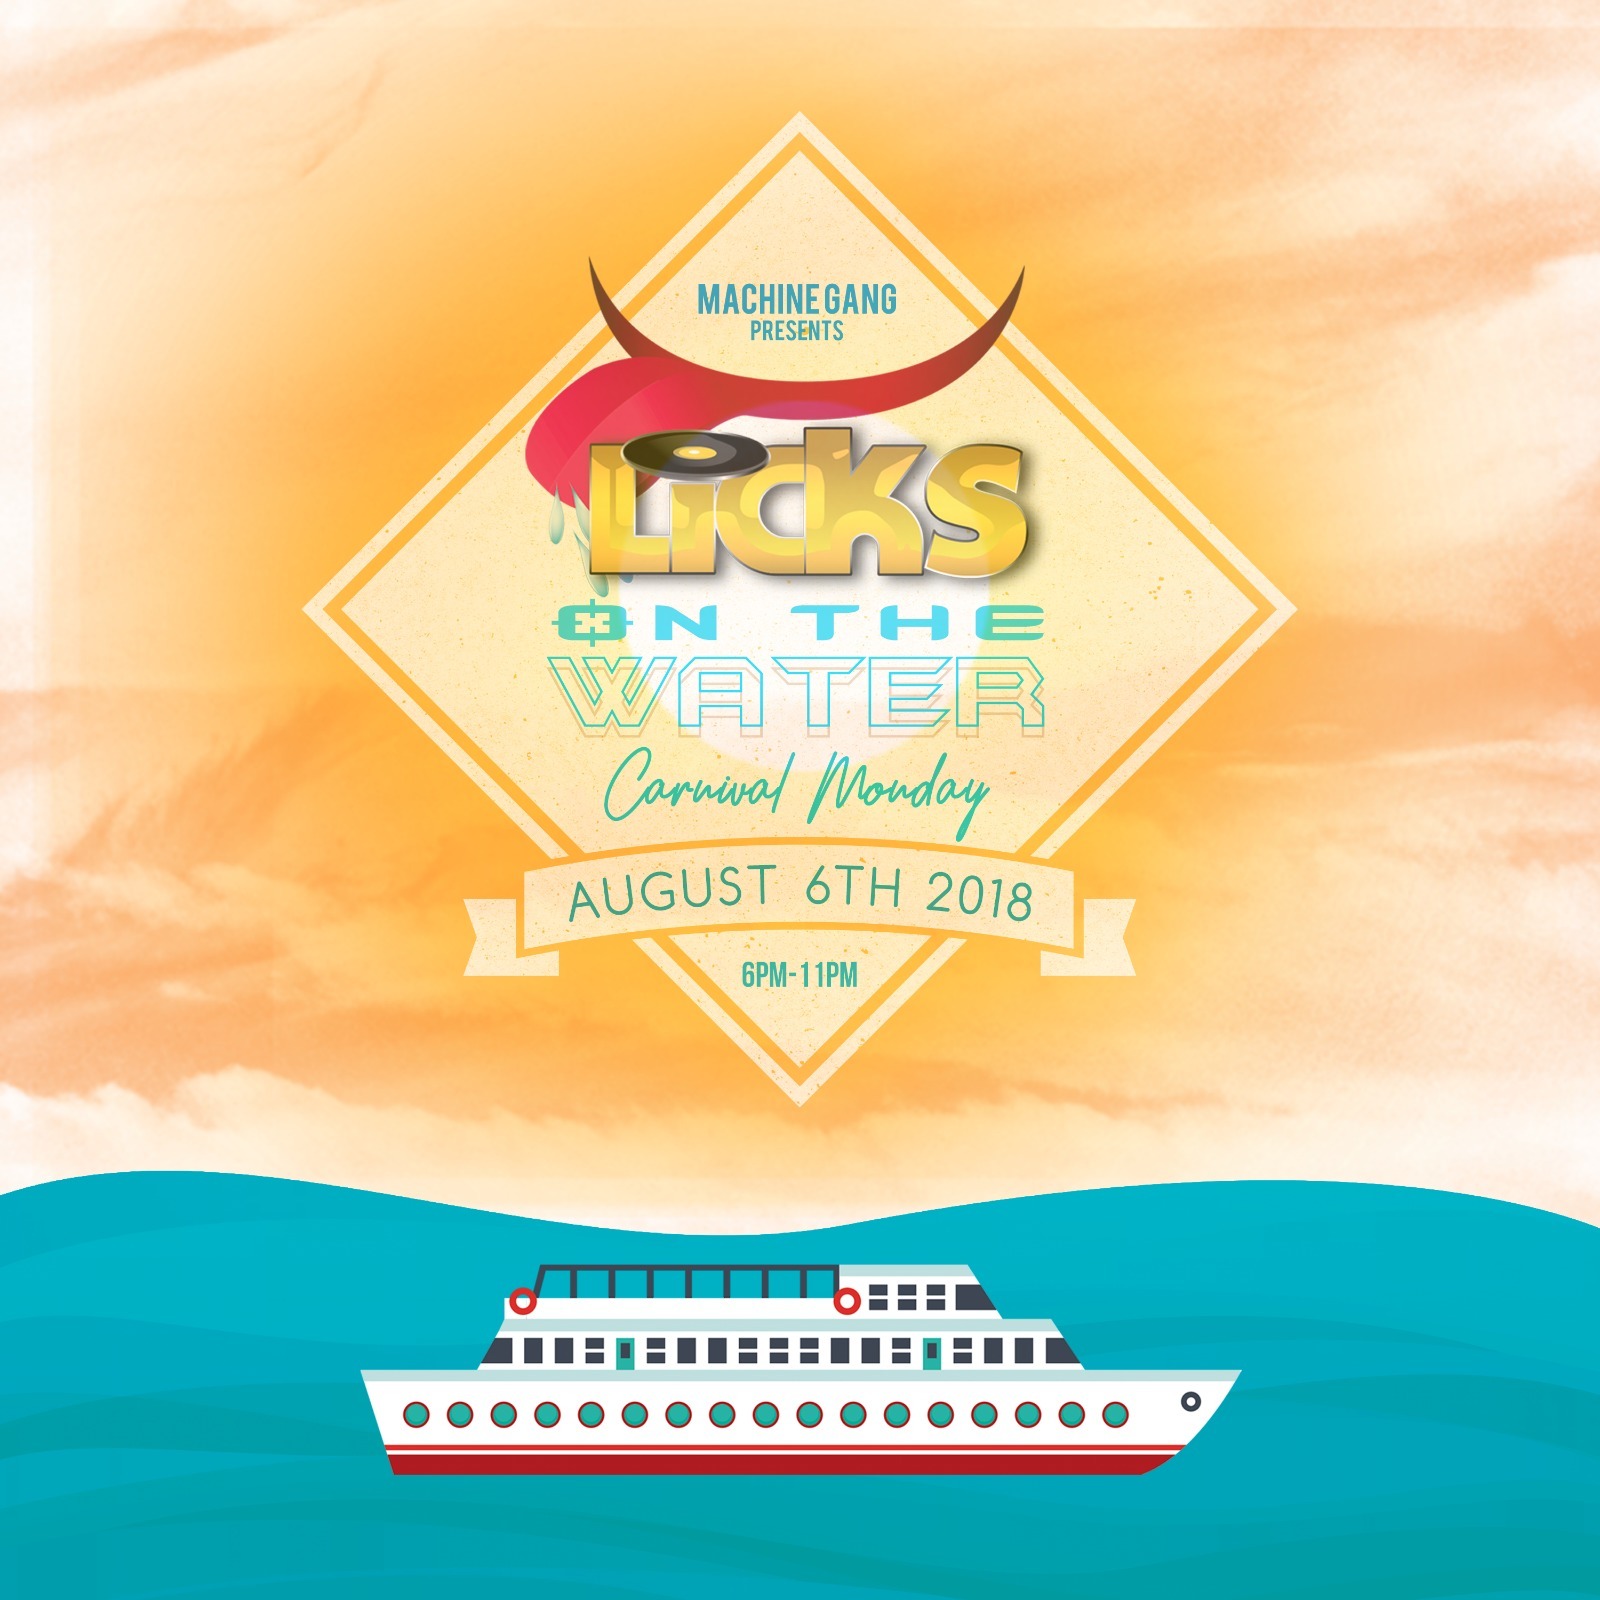 LiCKS ON THE WATER 2018 - TORONTO CARNIVAL MONDAY BOAT CRUISE